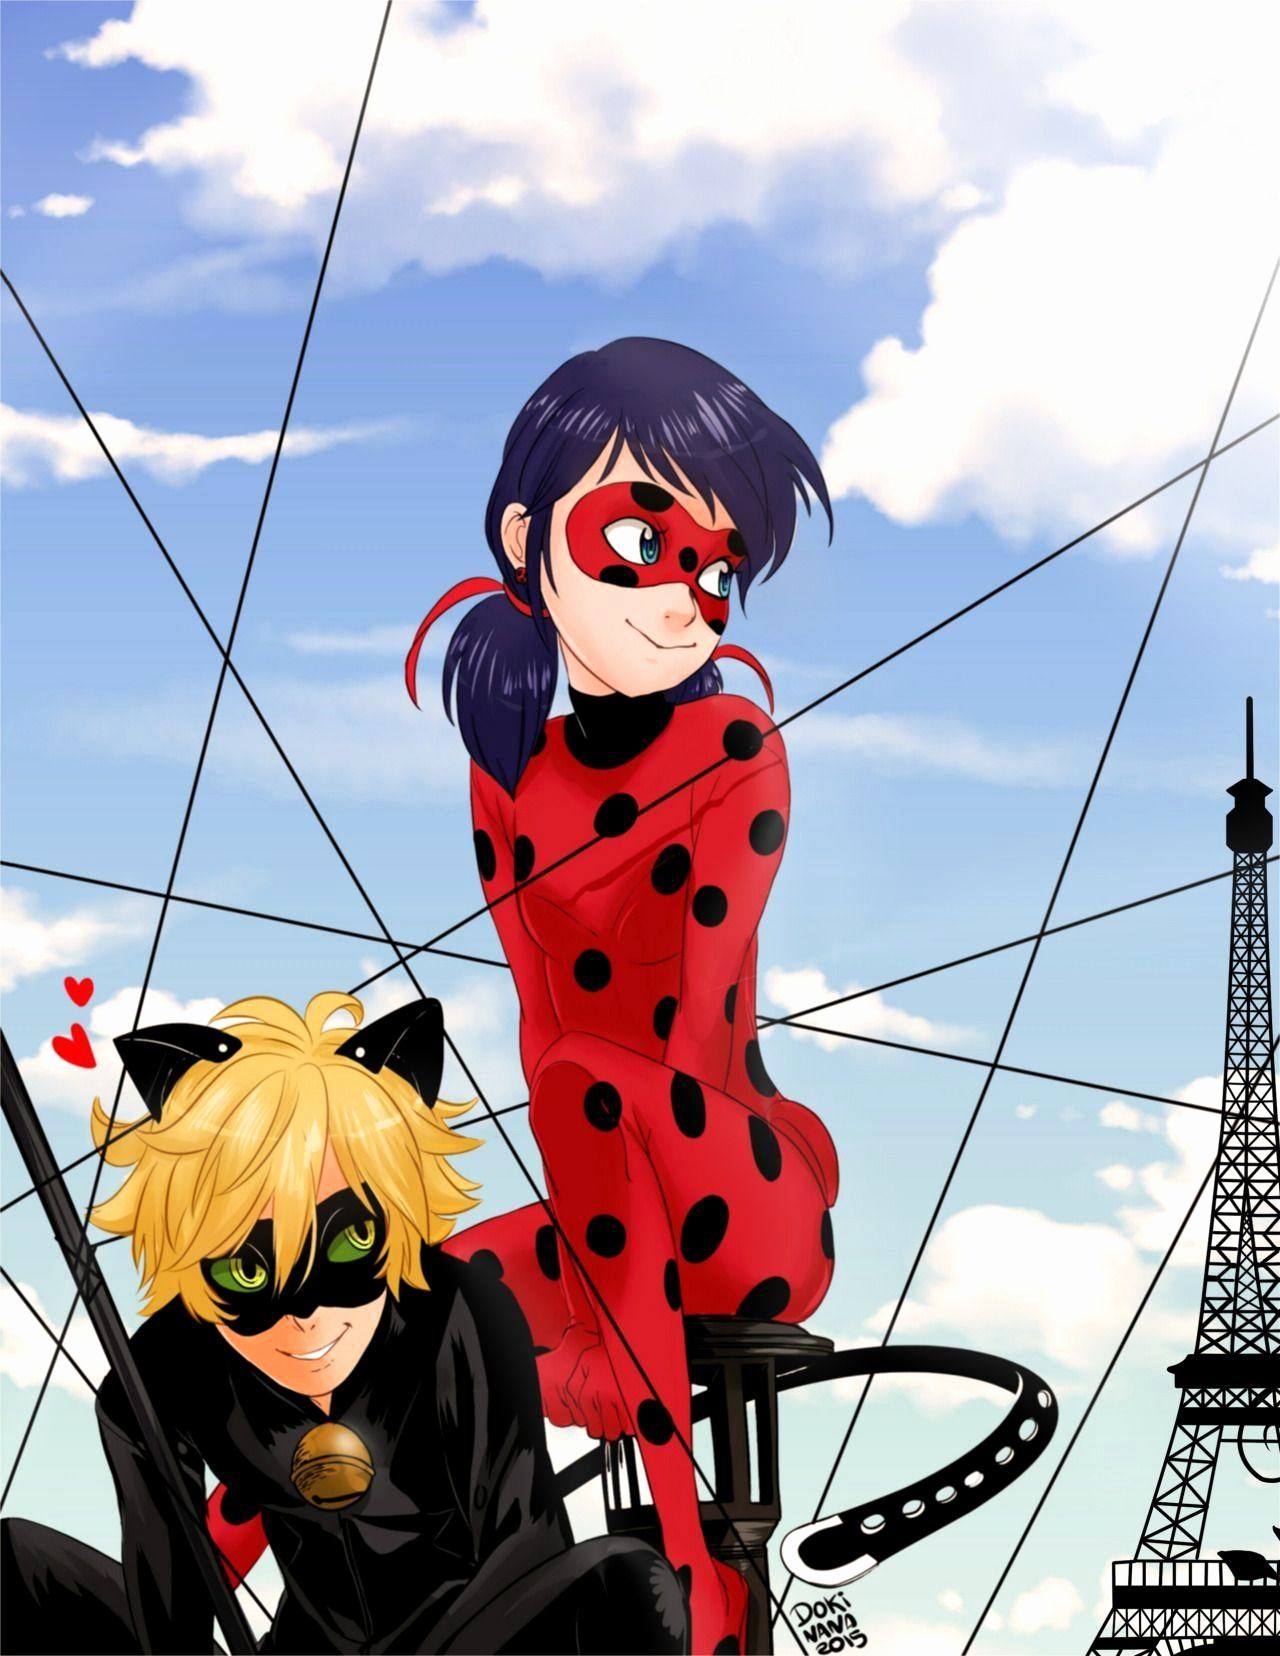 Anime Ladybug And Cat Noir Wallpapers Wallpaper Cave